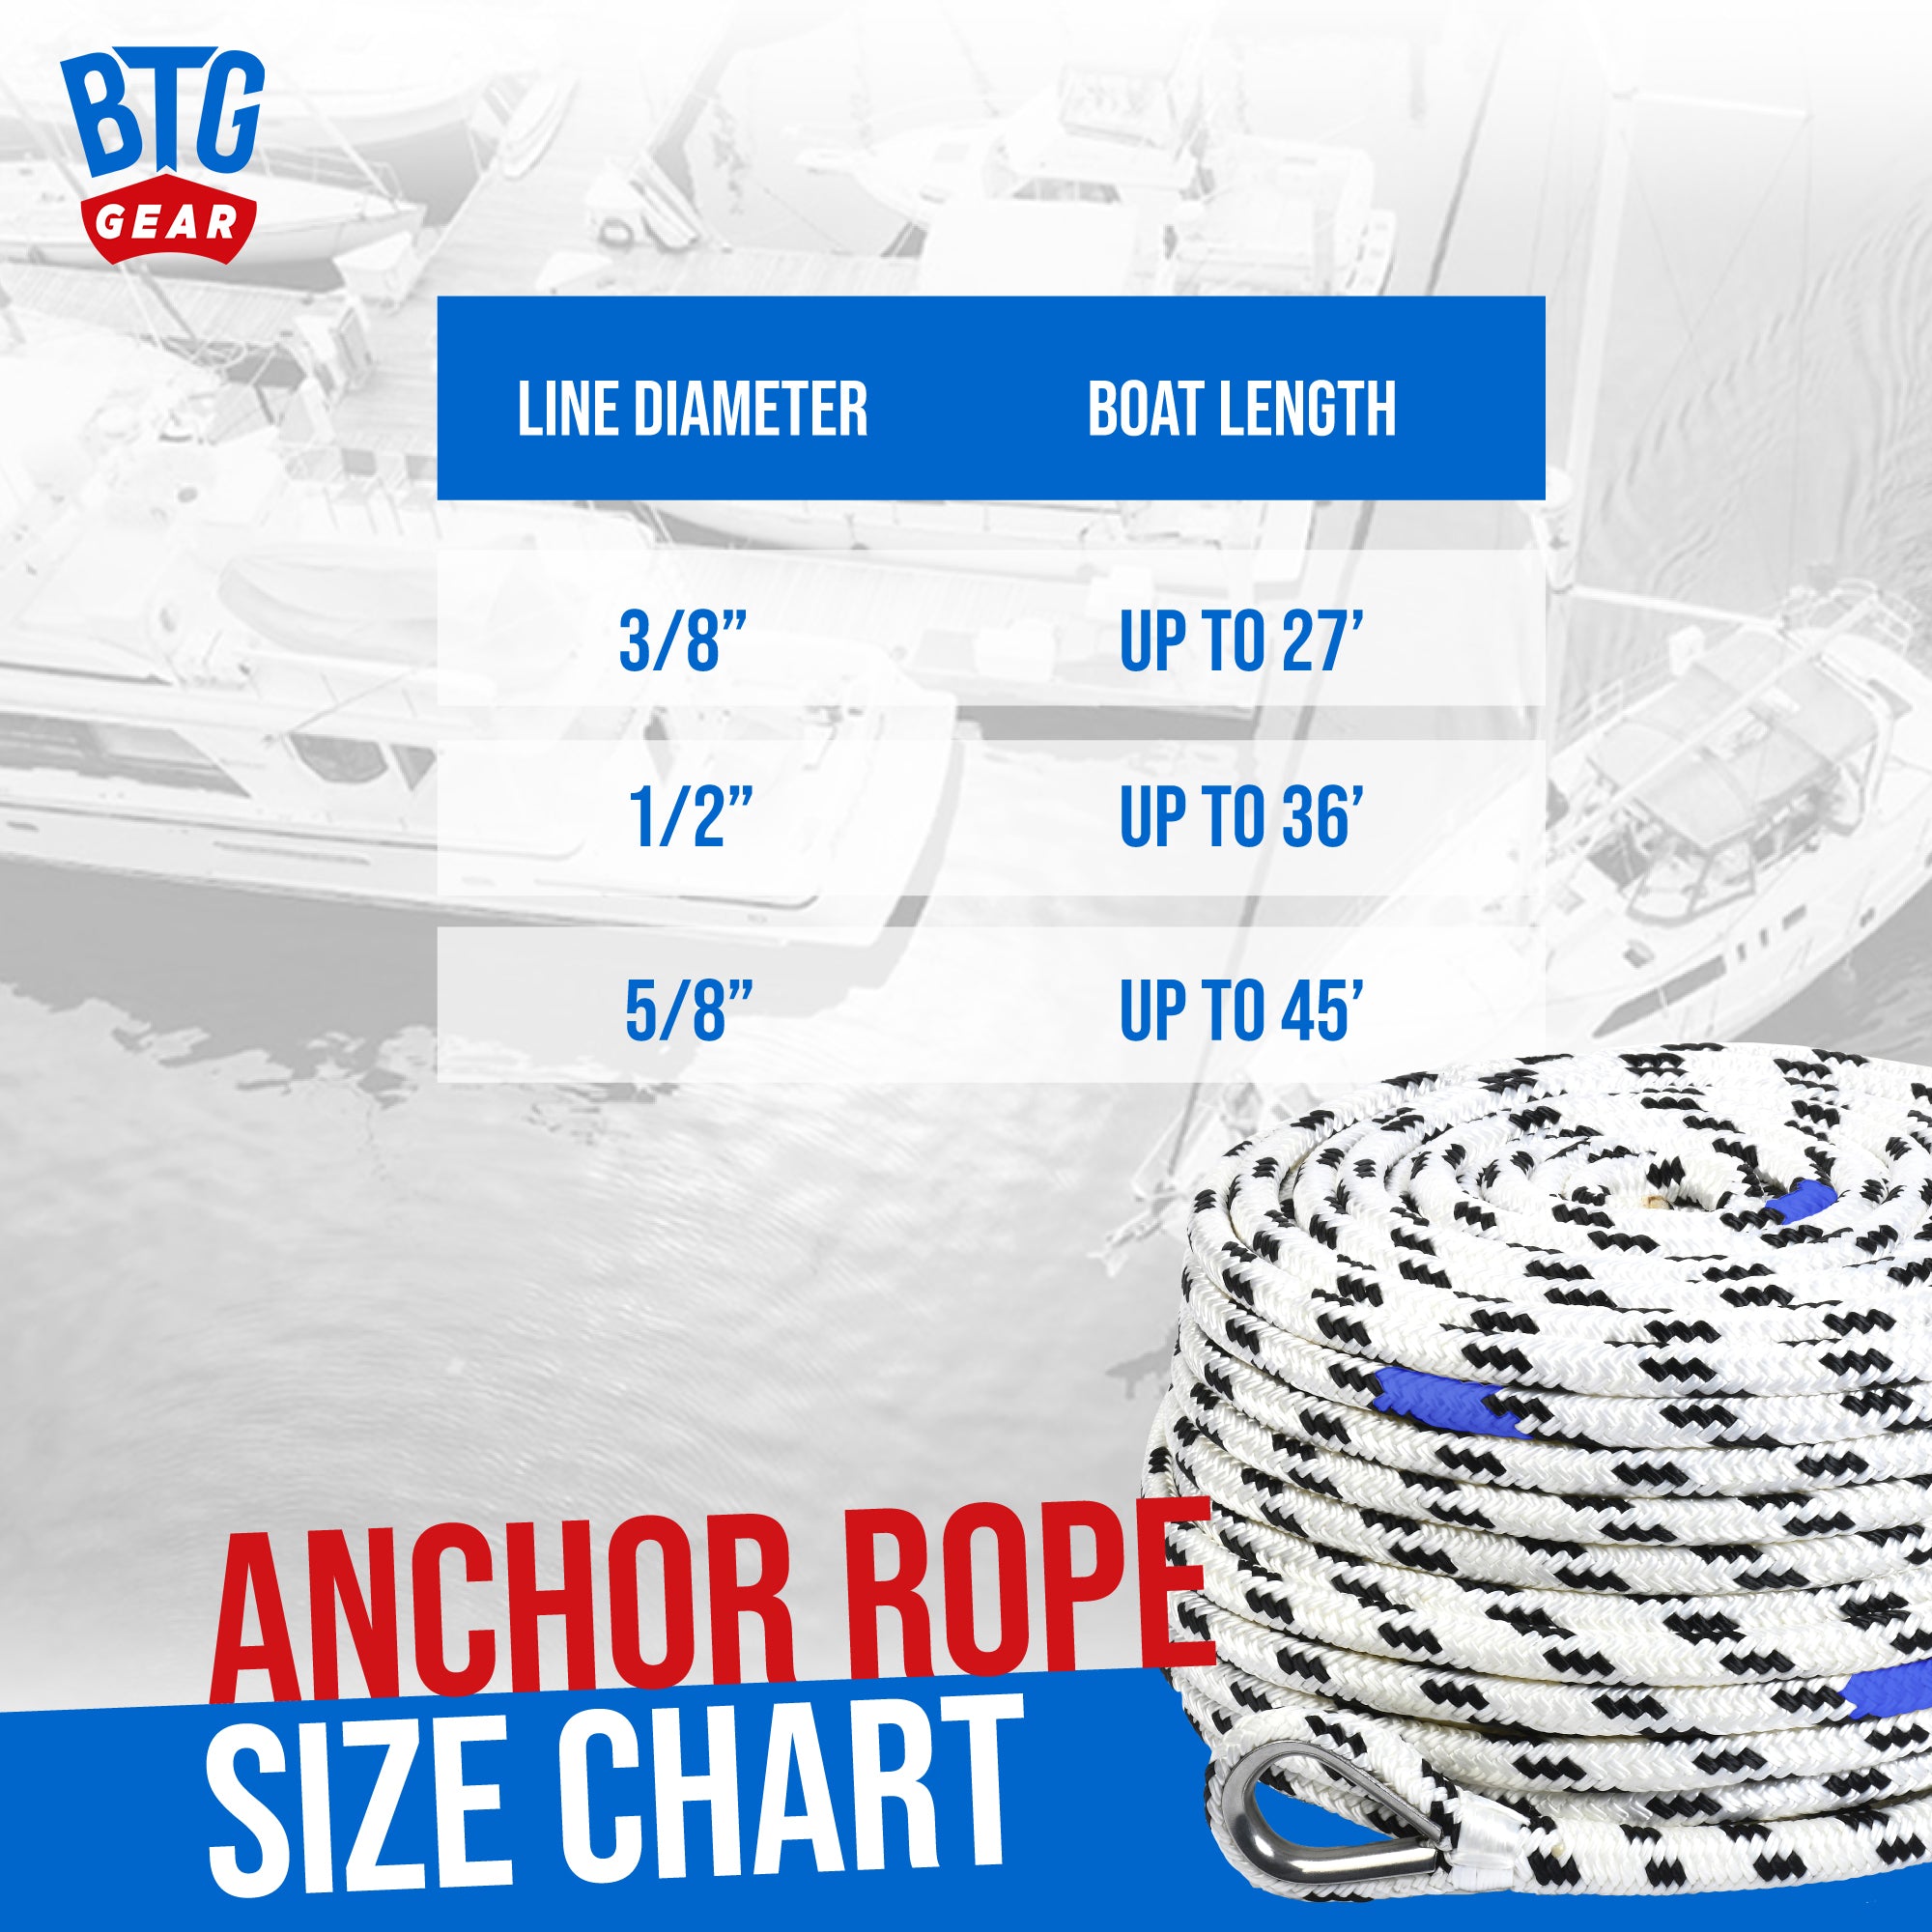 BTG Gear Nylon Boat Anchor Line w/Stainless Steel Thimble & Depth Markers 100'x1/2